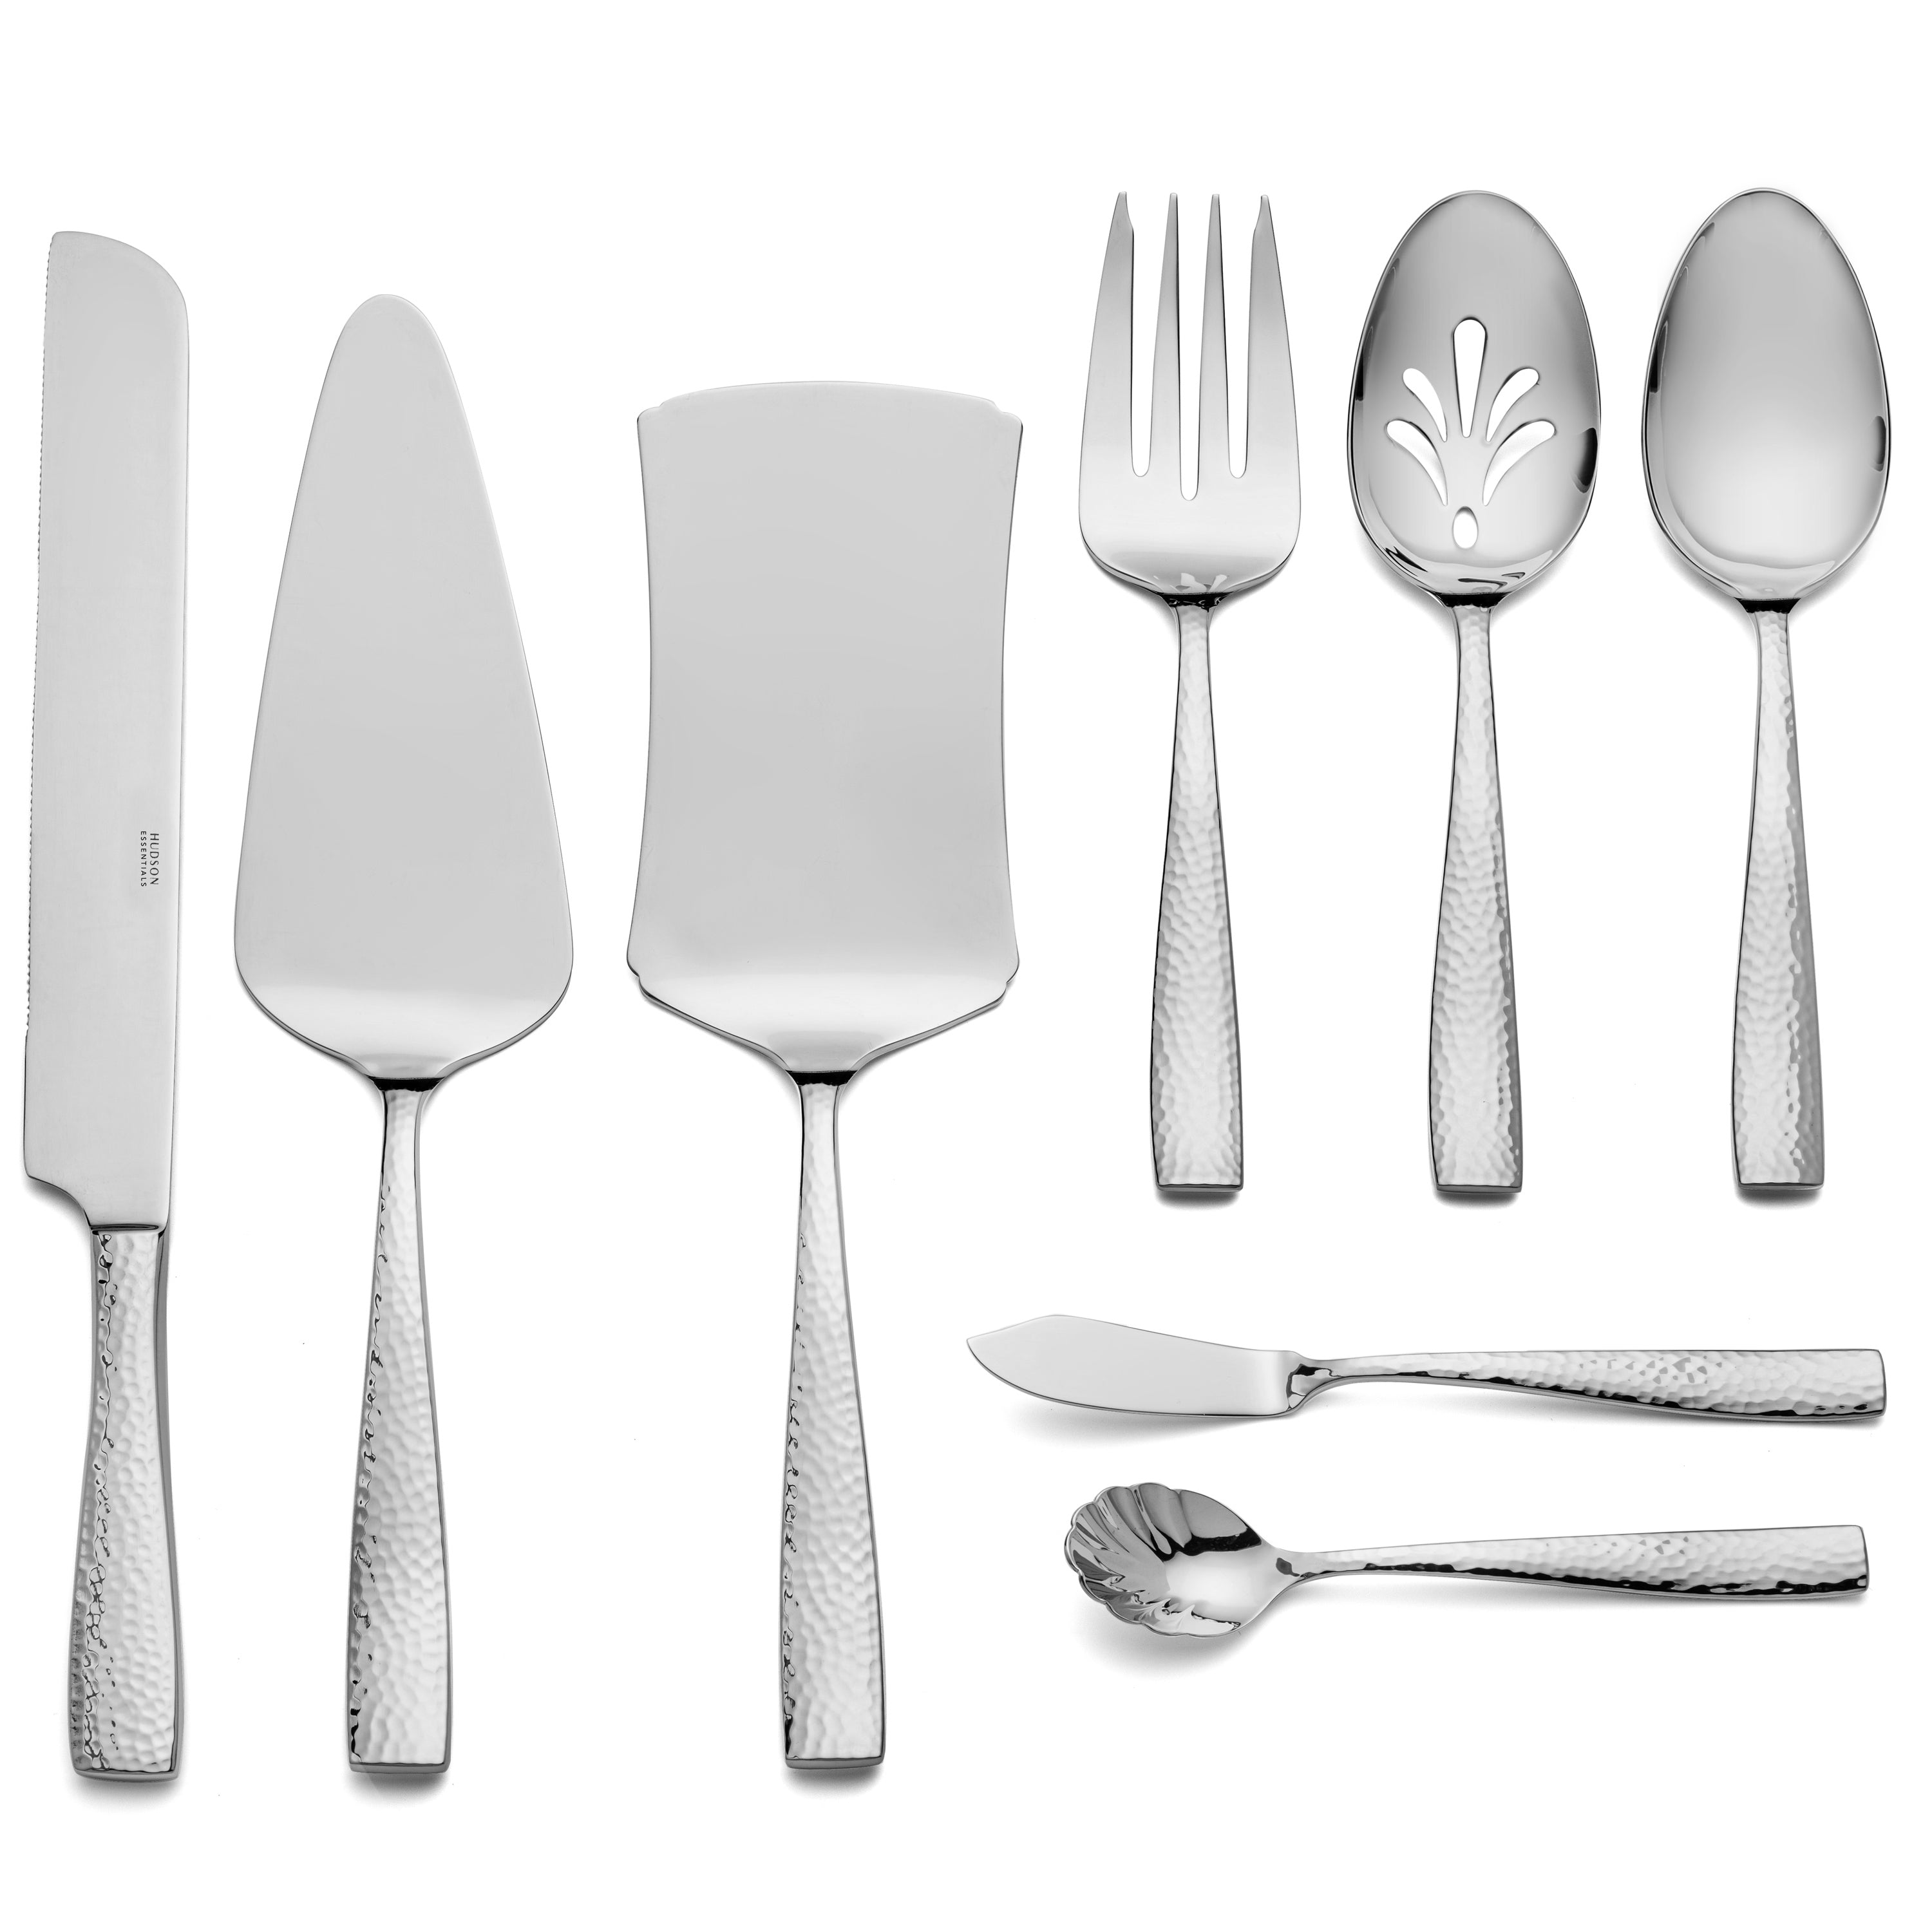 Hudson Essentials 8-Piece Hammered 18/10 Stainless Steel Serving Utensil Set - Hostess Silverware with Cake Knife